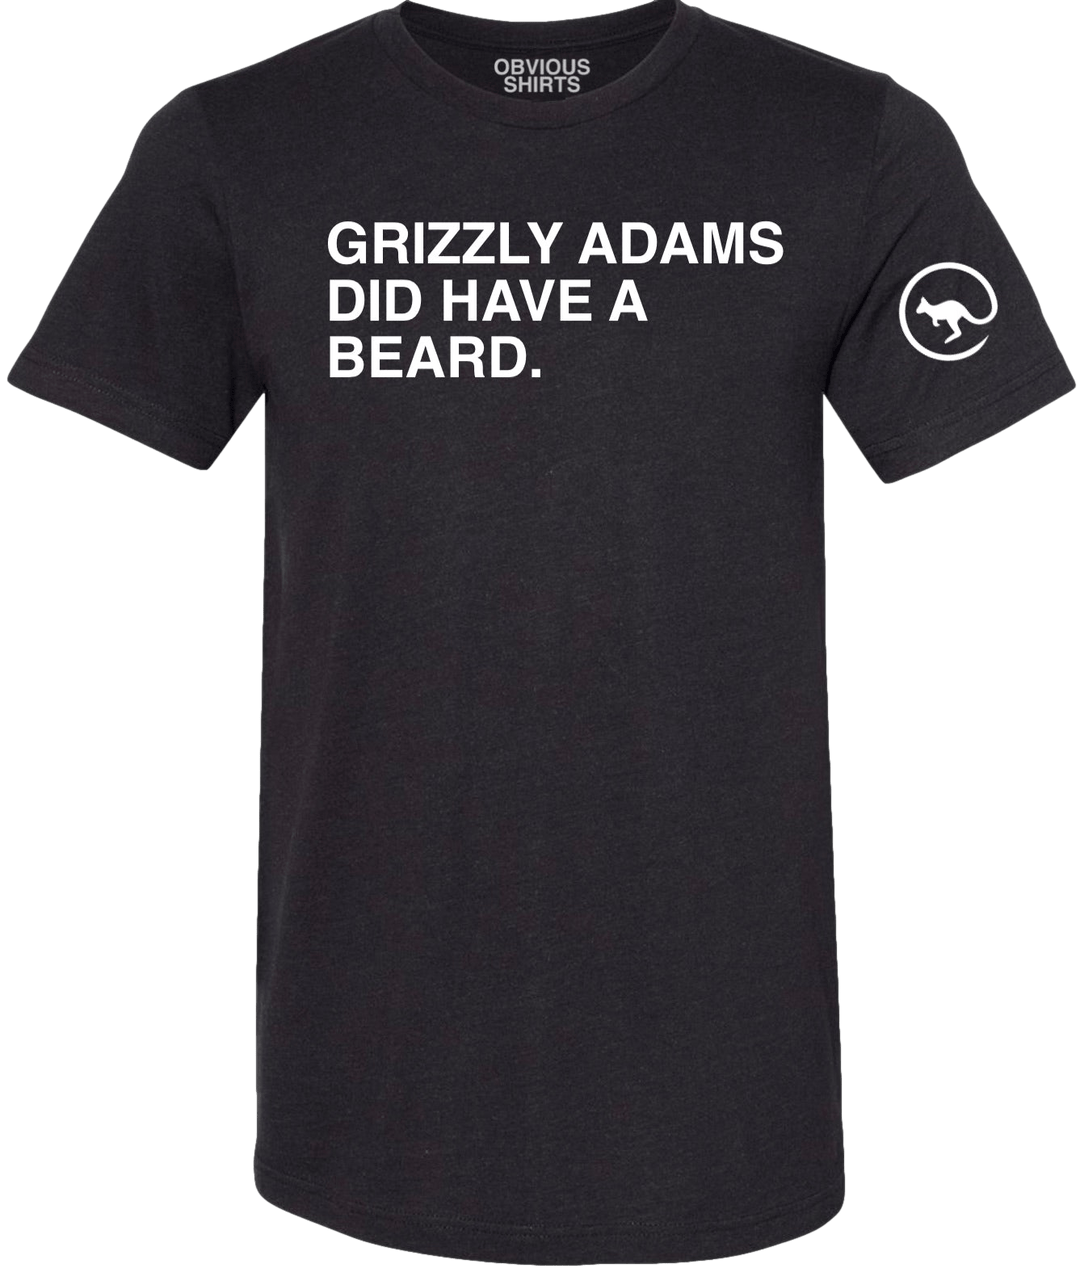 GRIZZLY ADAMS DID HAVE A BEARD (BLACK) - OBVIOUS SHIRTS